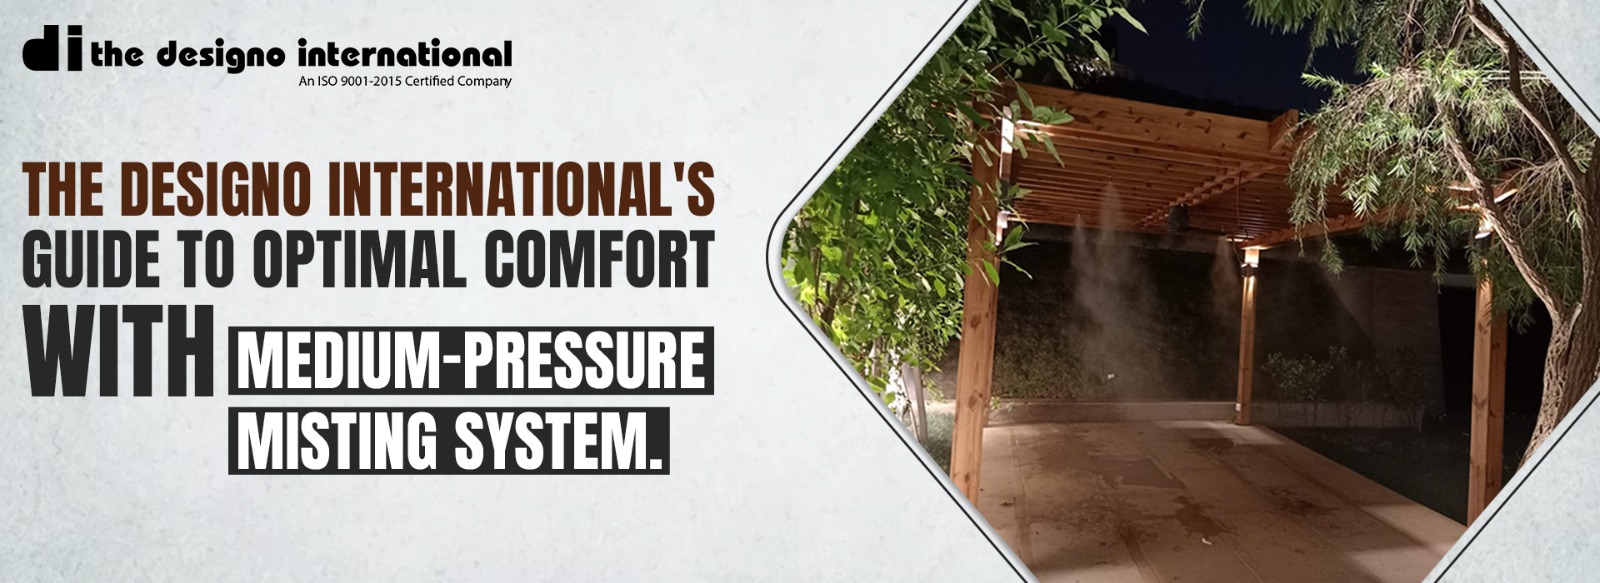 The Designo International’s Guide to Optimal Comfort with Medium-Pressure Misting System